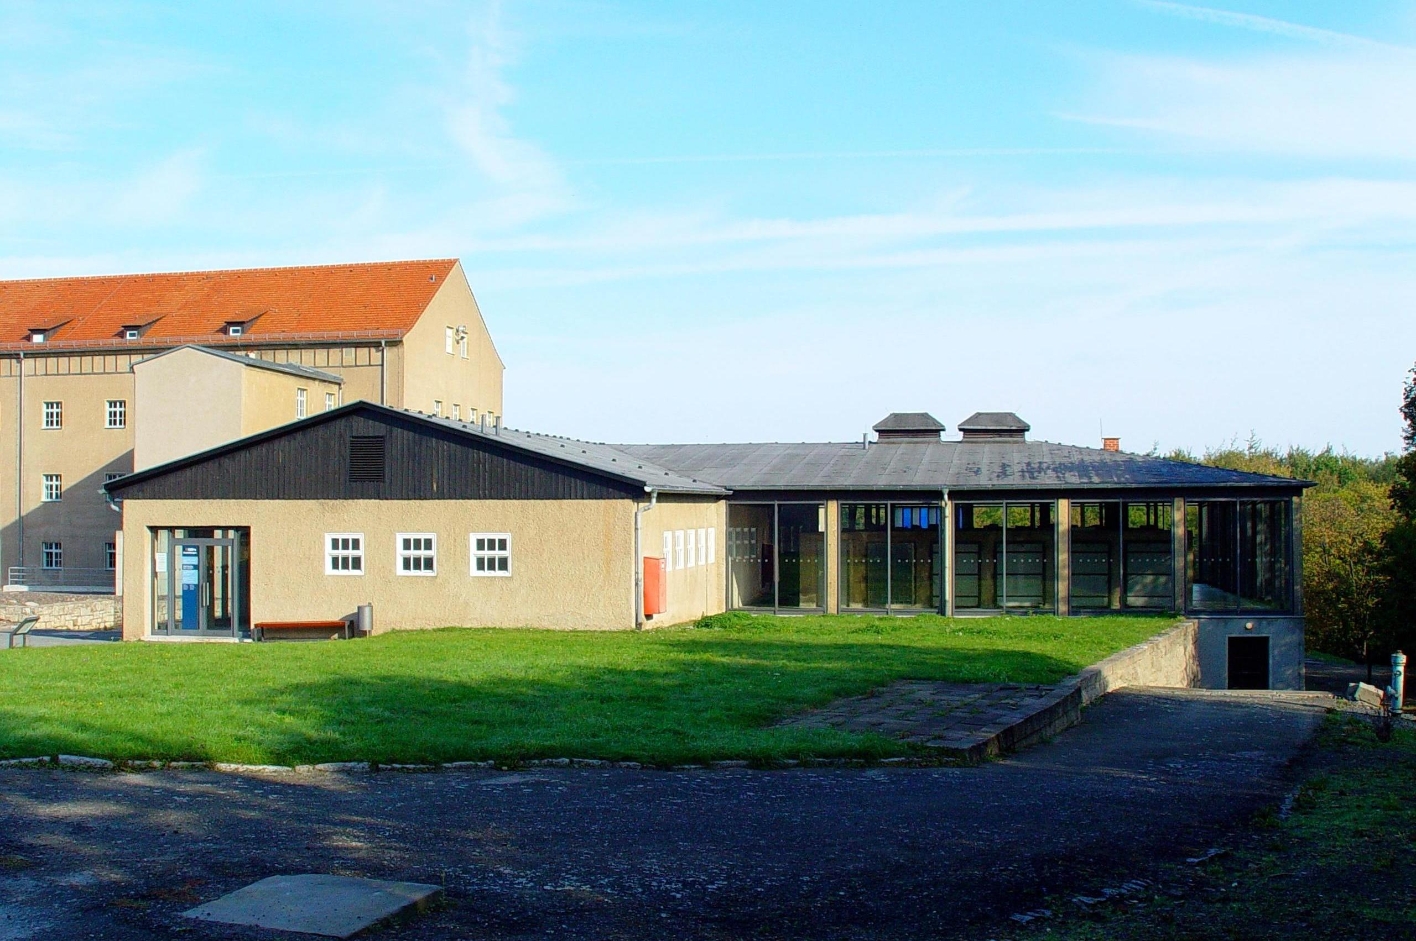 The flat former disinfection building as it looks today. The right wing has glass walls. In the background the former depot building.